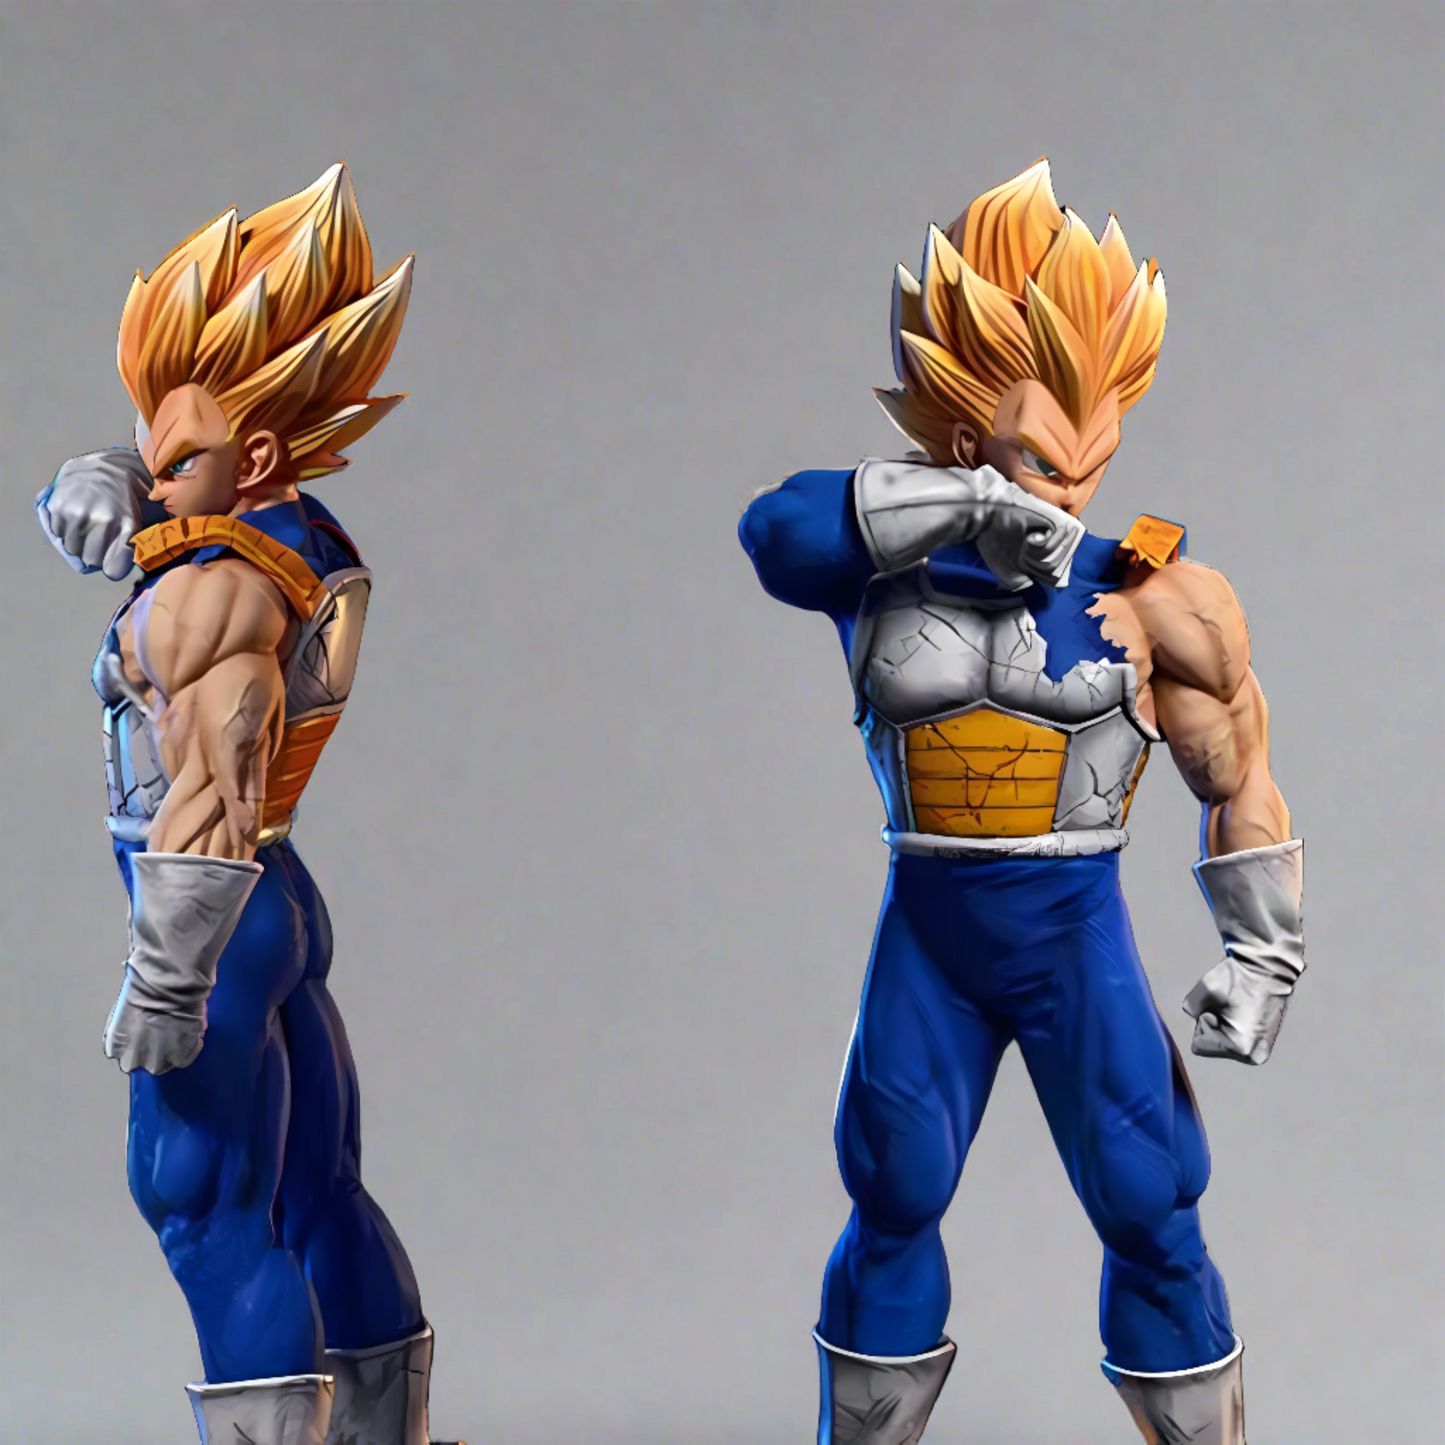 The collectible Saiyan Warrior Vegeta figure from Dragon Ball, in dynamic battle pose, representing the fiery spirit of the character.